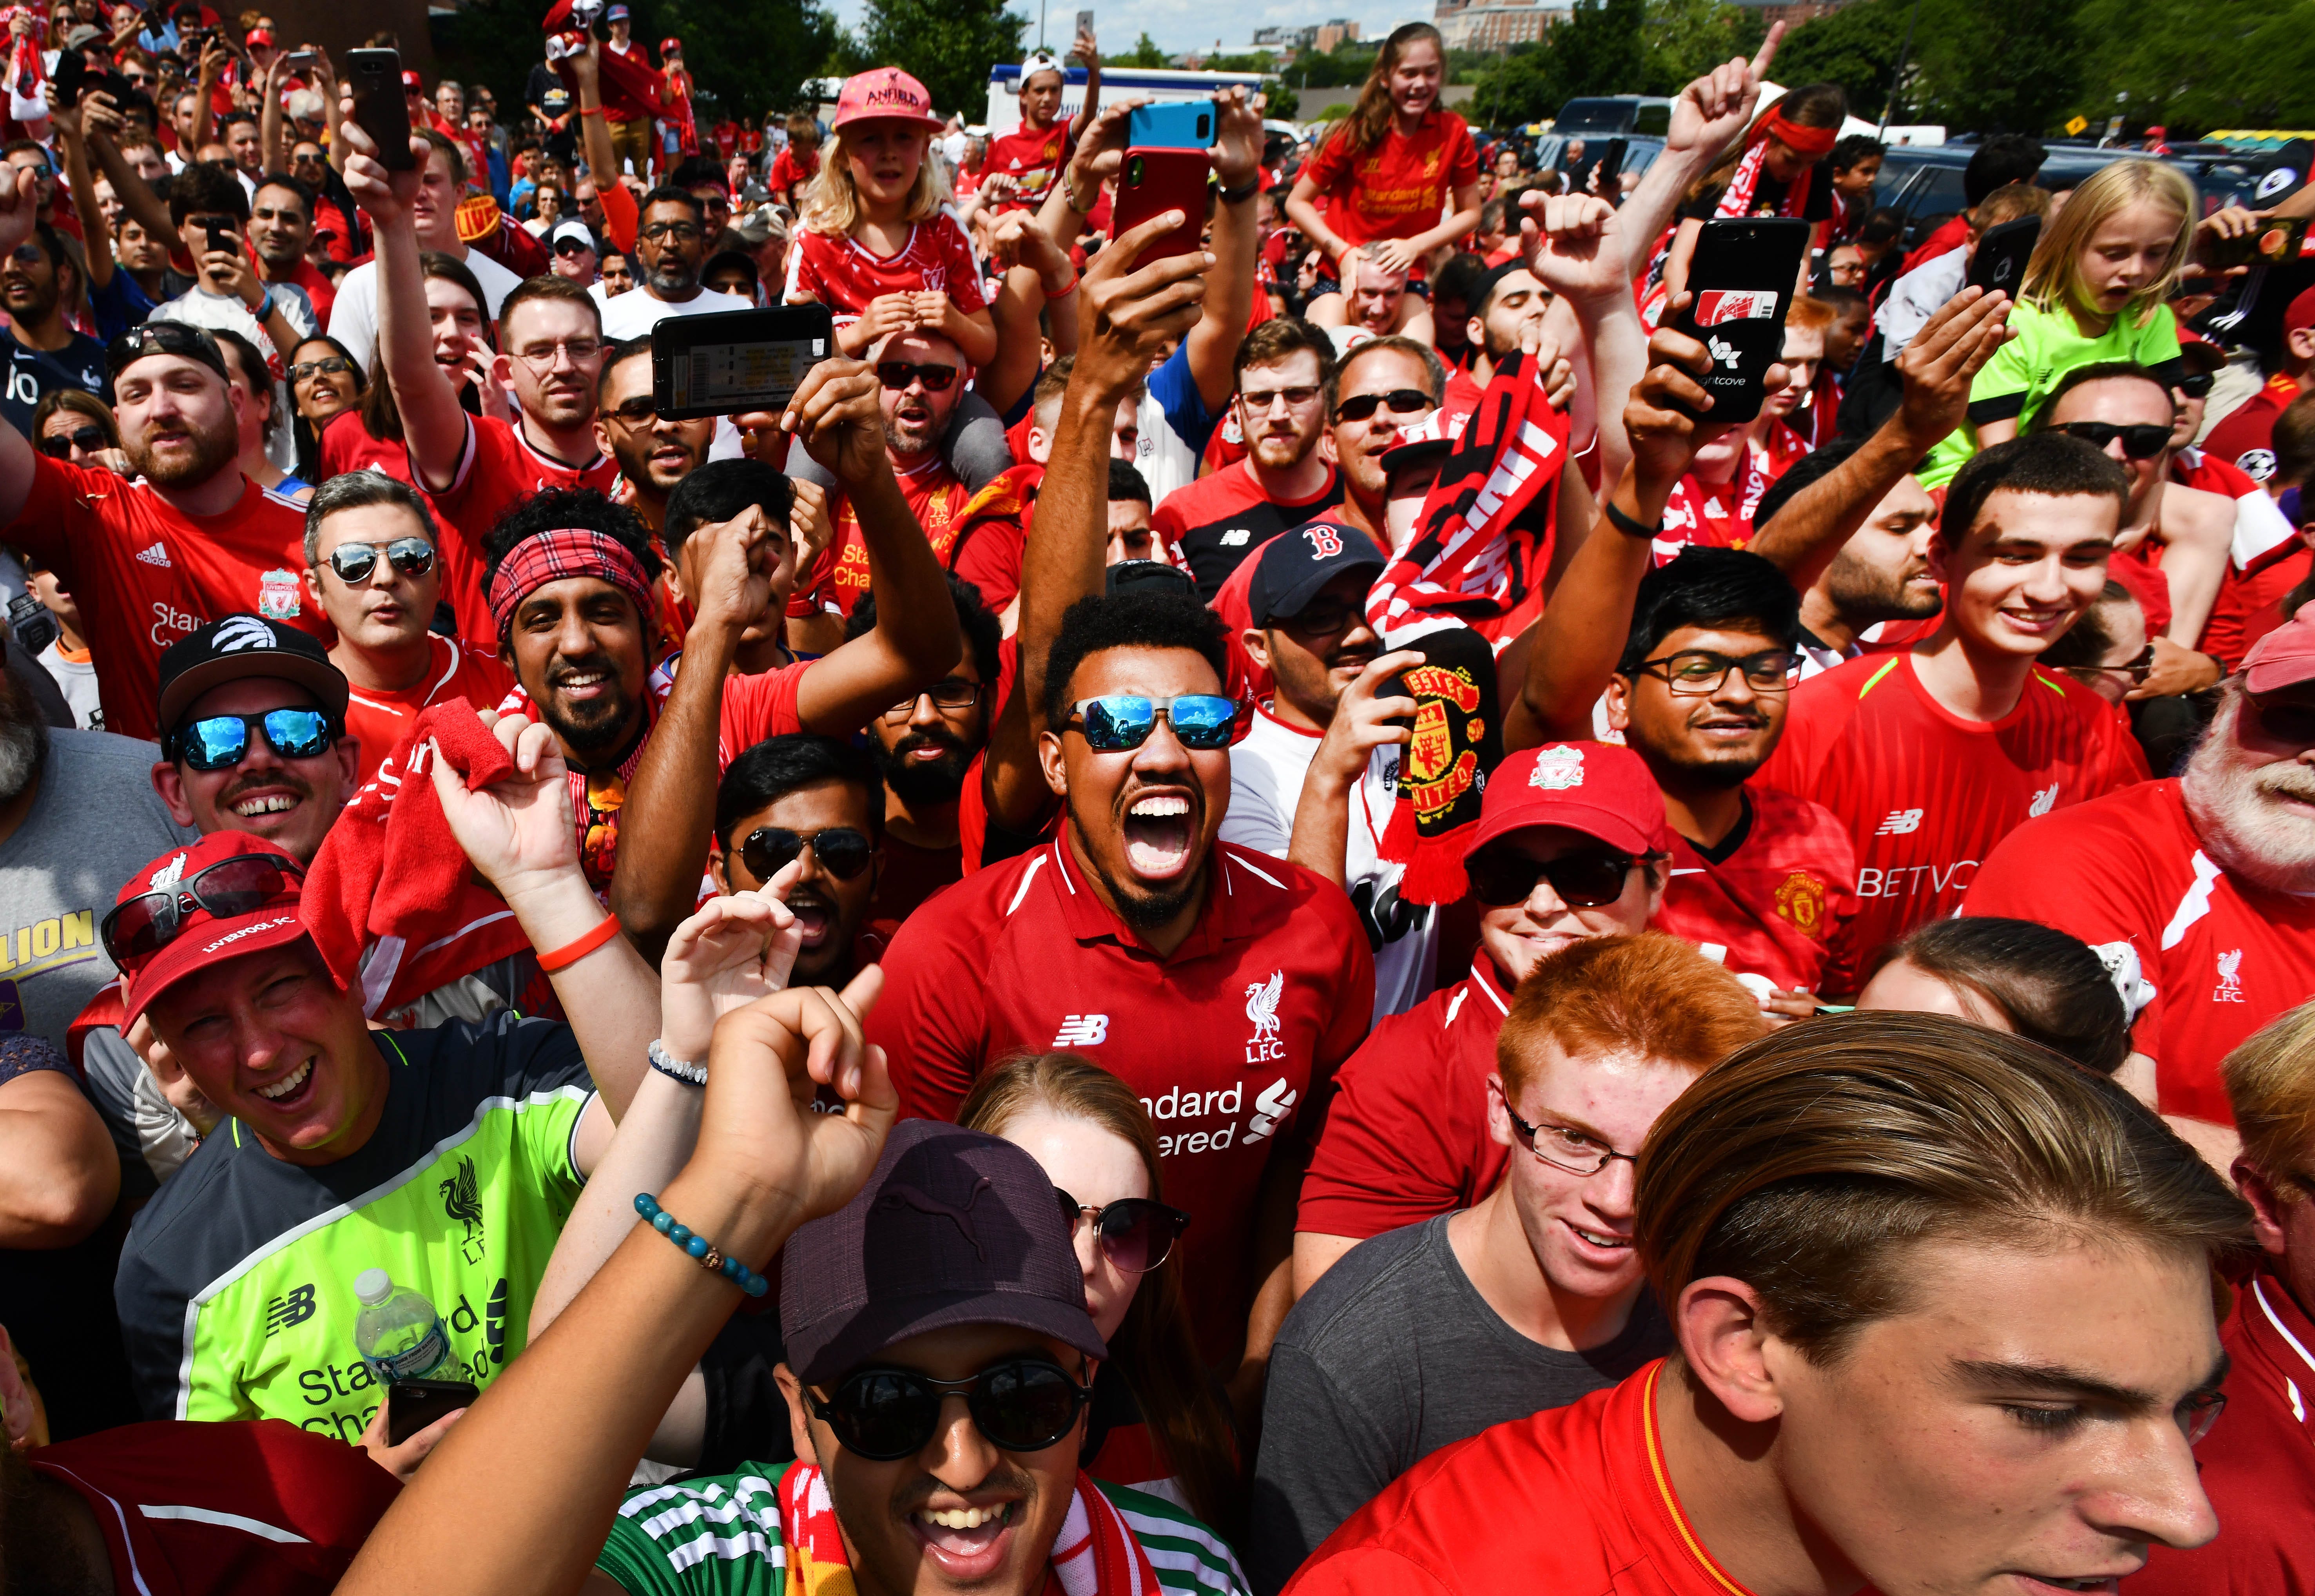 The crowd reacts as Manchester United and Liverpool buses arrive for the International Champions Cup game at Michigan Stadium.